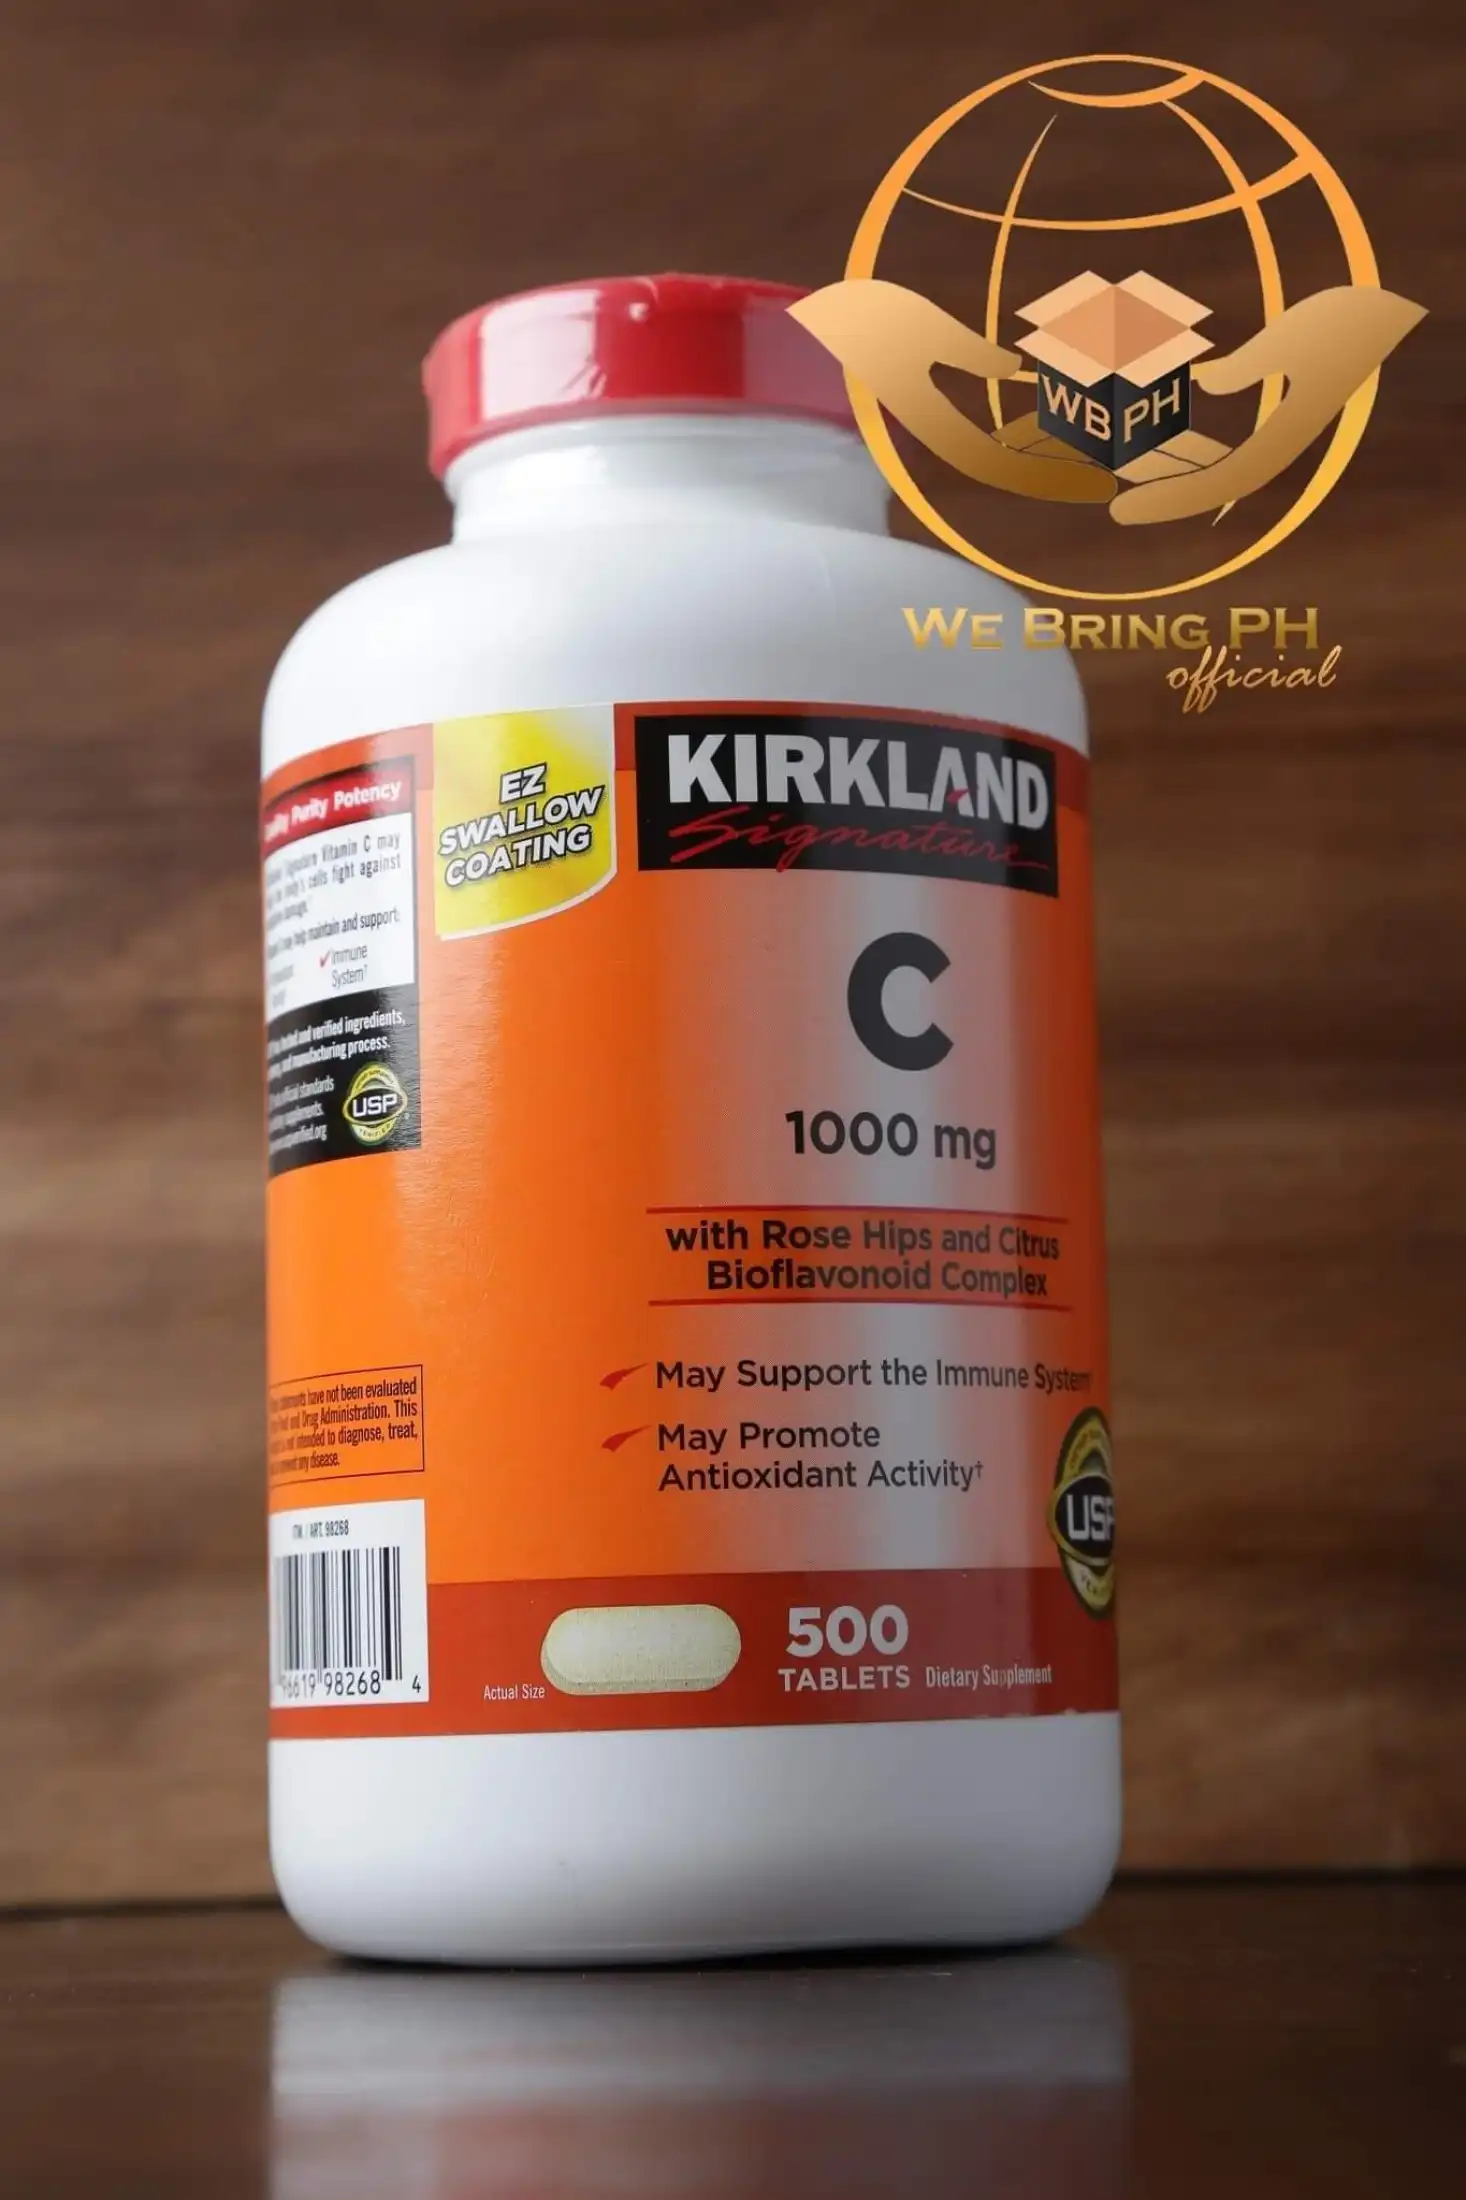 Kirkland Vitamin C 1000mg 500tablets Expiry June 24 Kirkland Vit C 1000mg Authentic And Imported From Usa Vit C1000 500 Tablets With Rose Hips And Citrus Bioflavonoid Complex Vitamin C 1000 500pcs